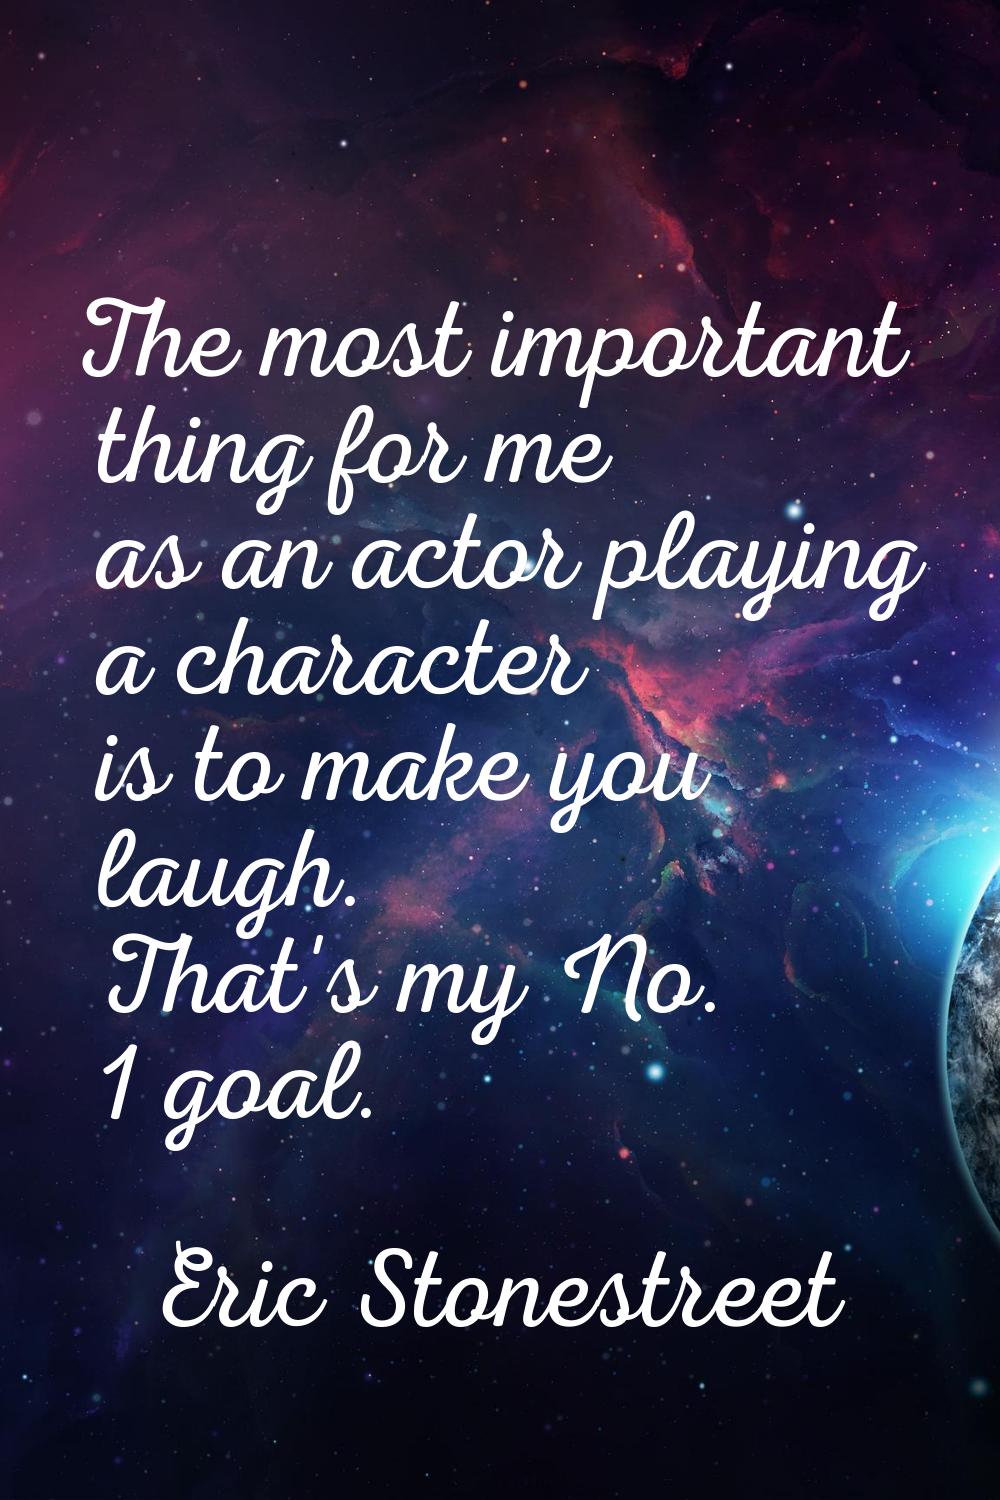 The most important thing for me as an actor playing a character is to make you laugh. That's my No.